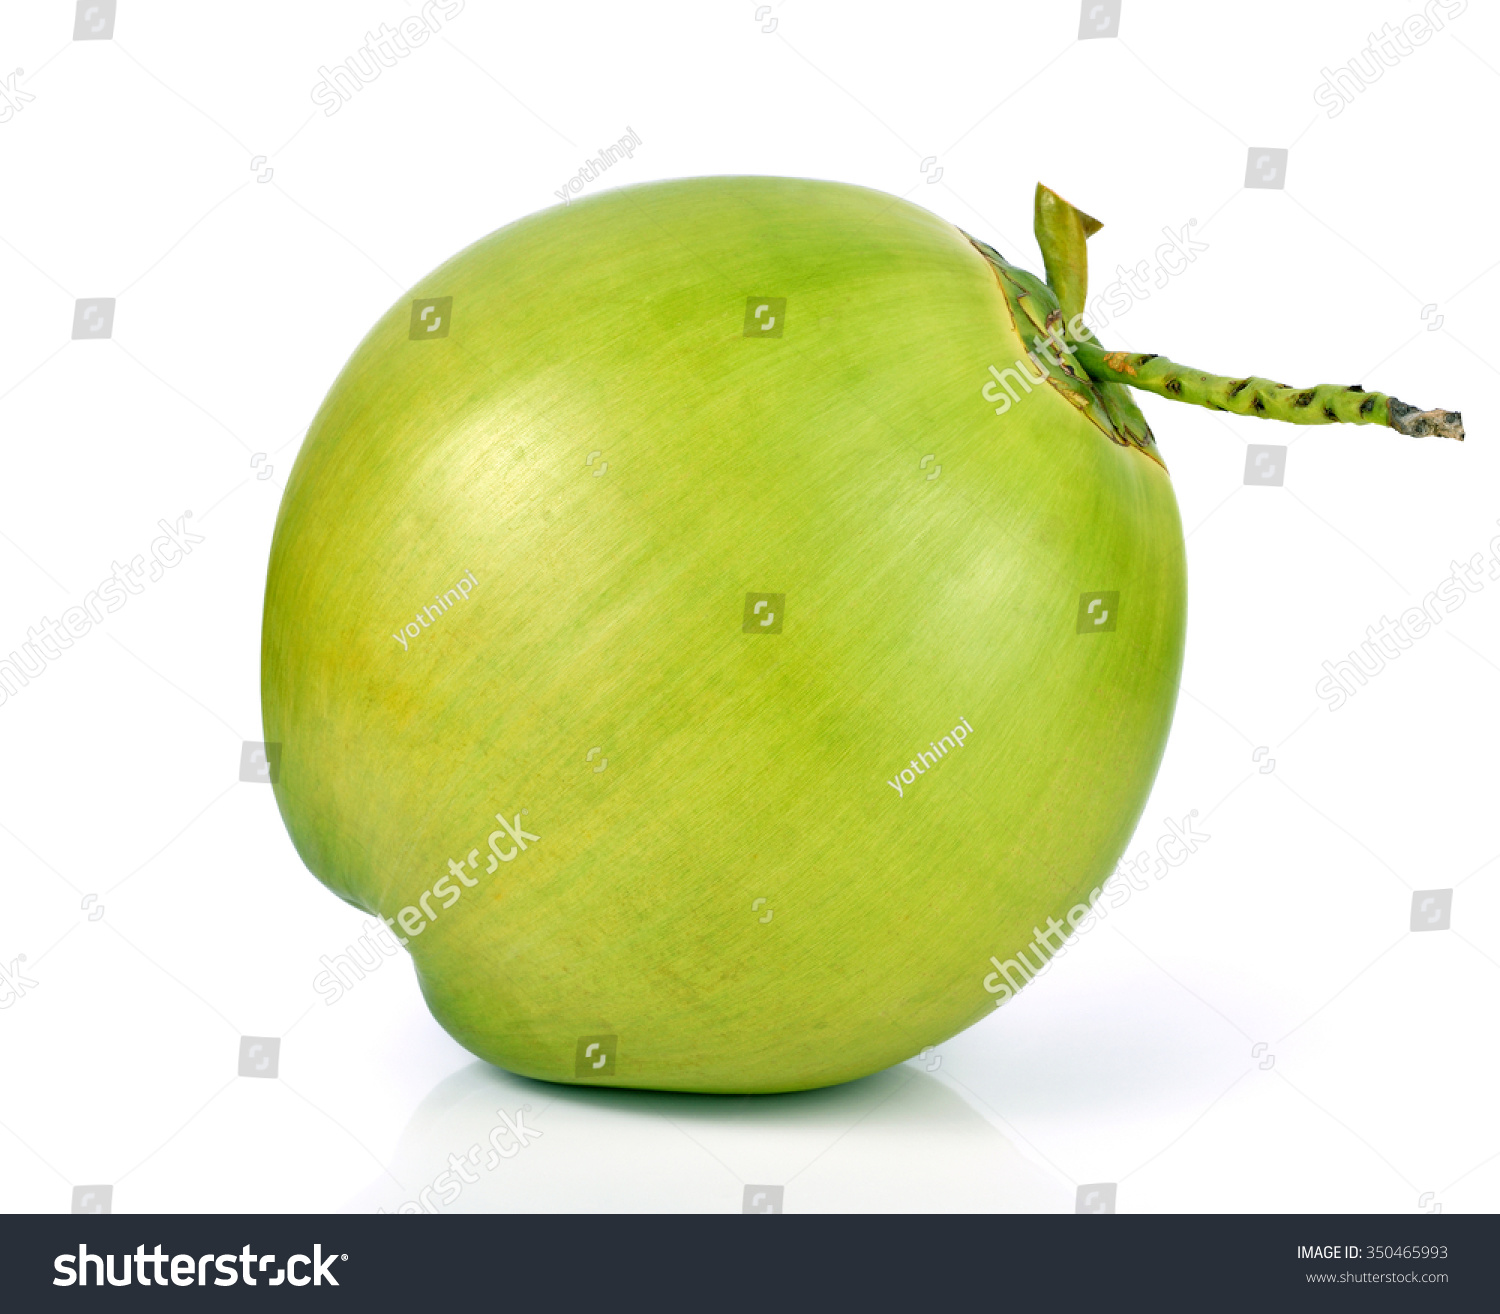 118,484 Green coconut branches Images, Stock Photos & Vectors ...